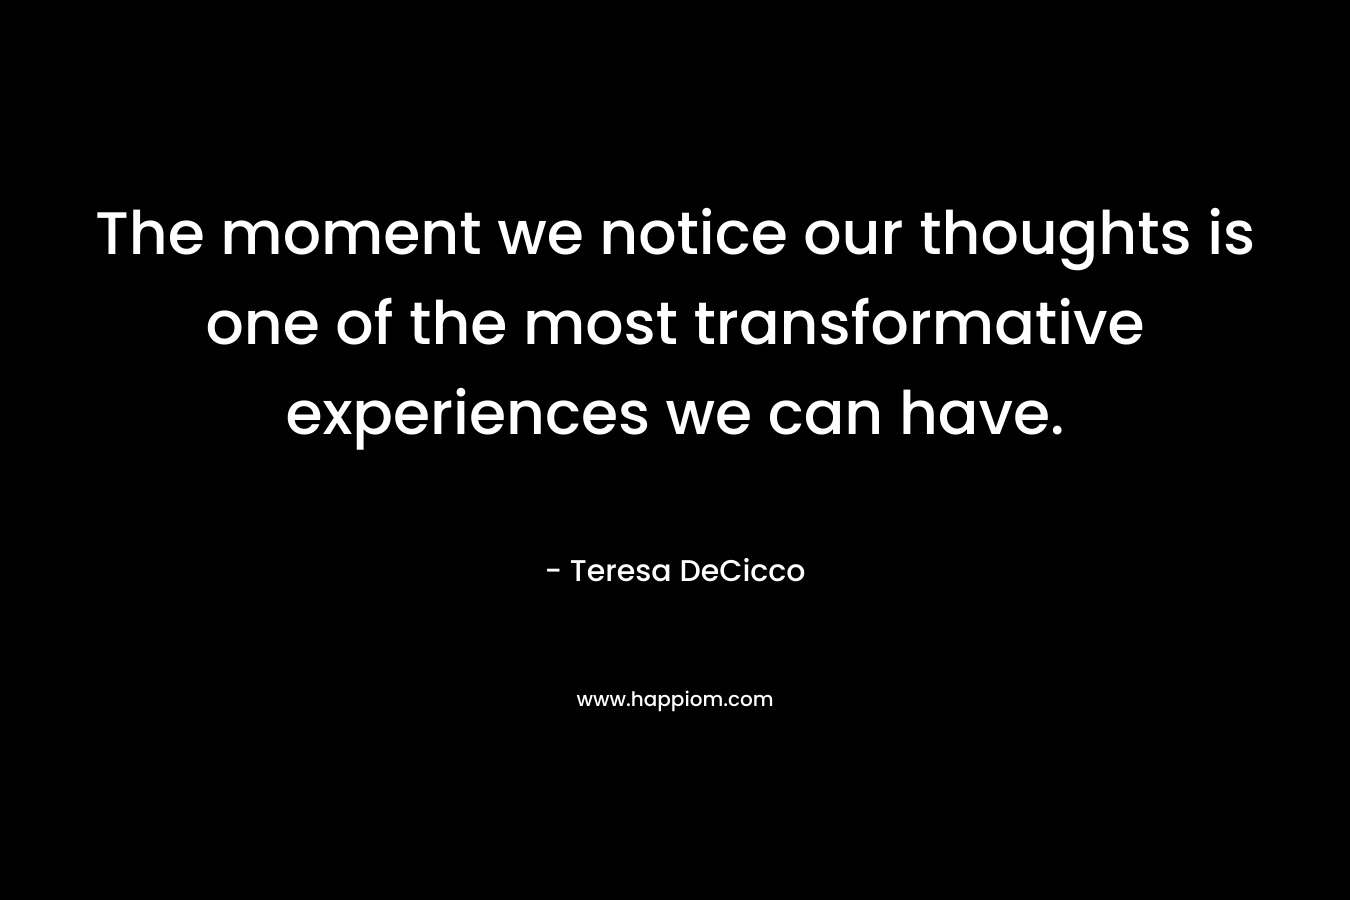 The moment we notice our thoughts is one of the most transformative experiences we can have.